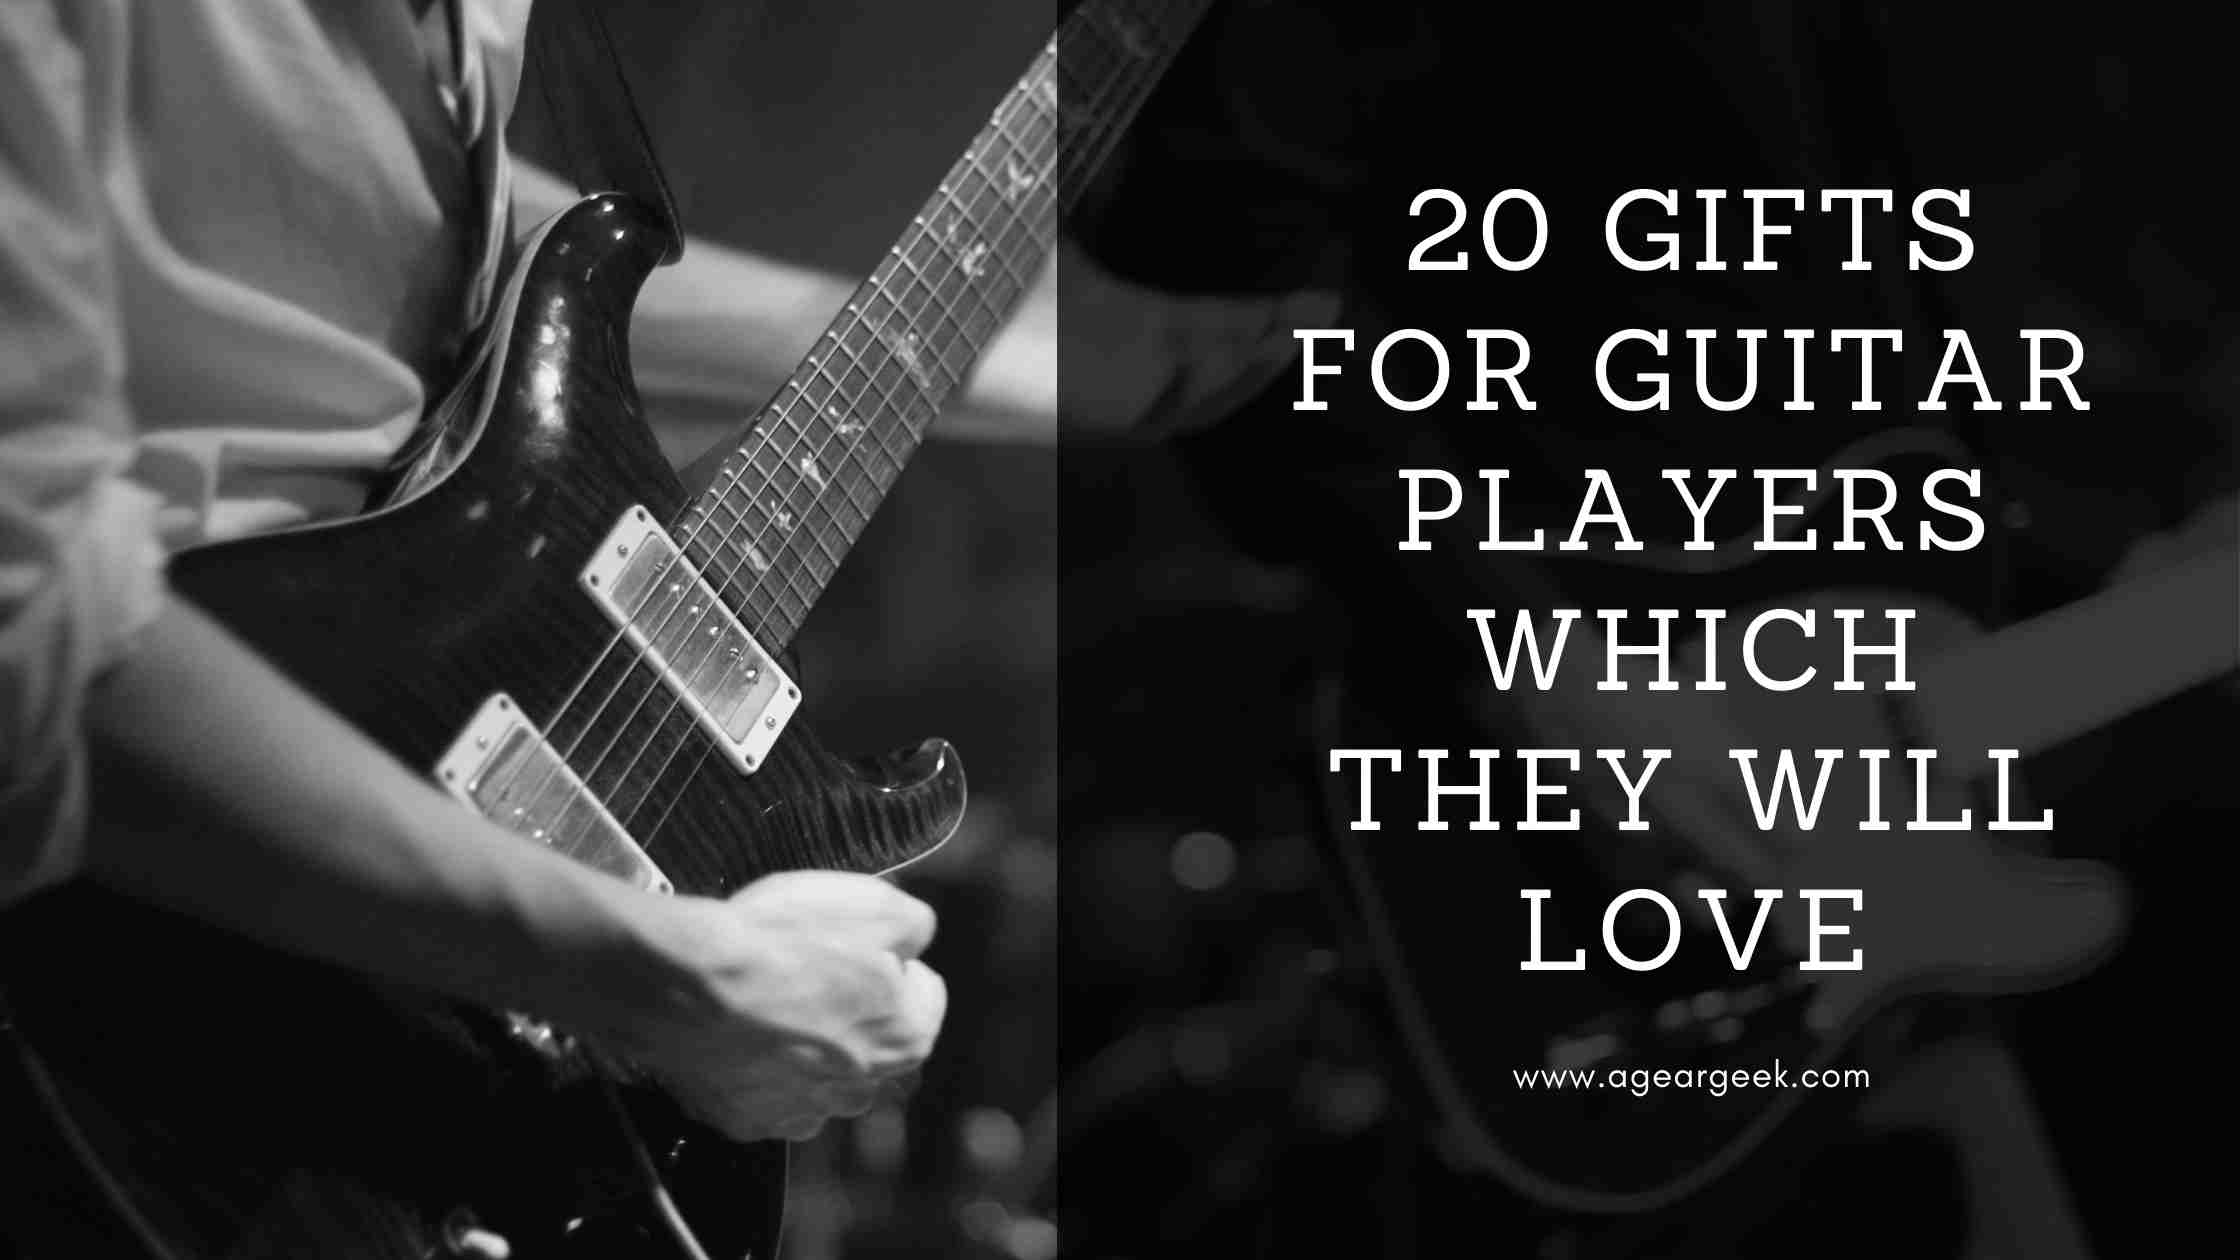 You are currently viewing 20 Gifts for Guitar Players which they will Love